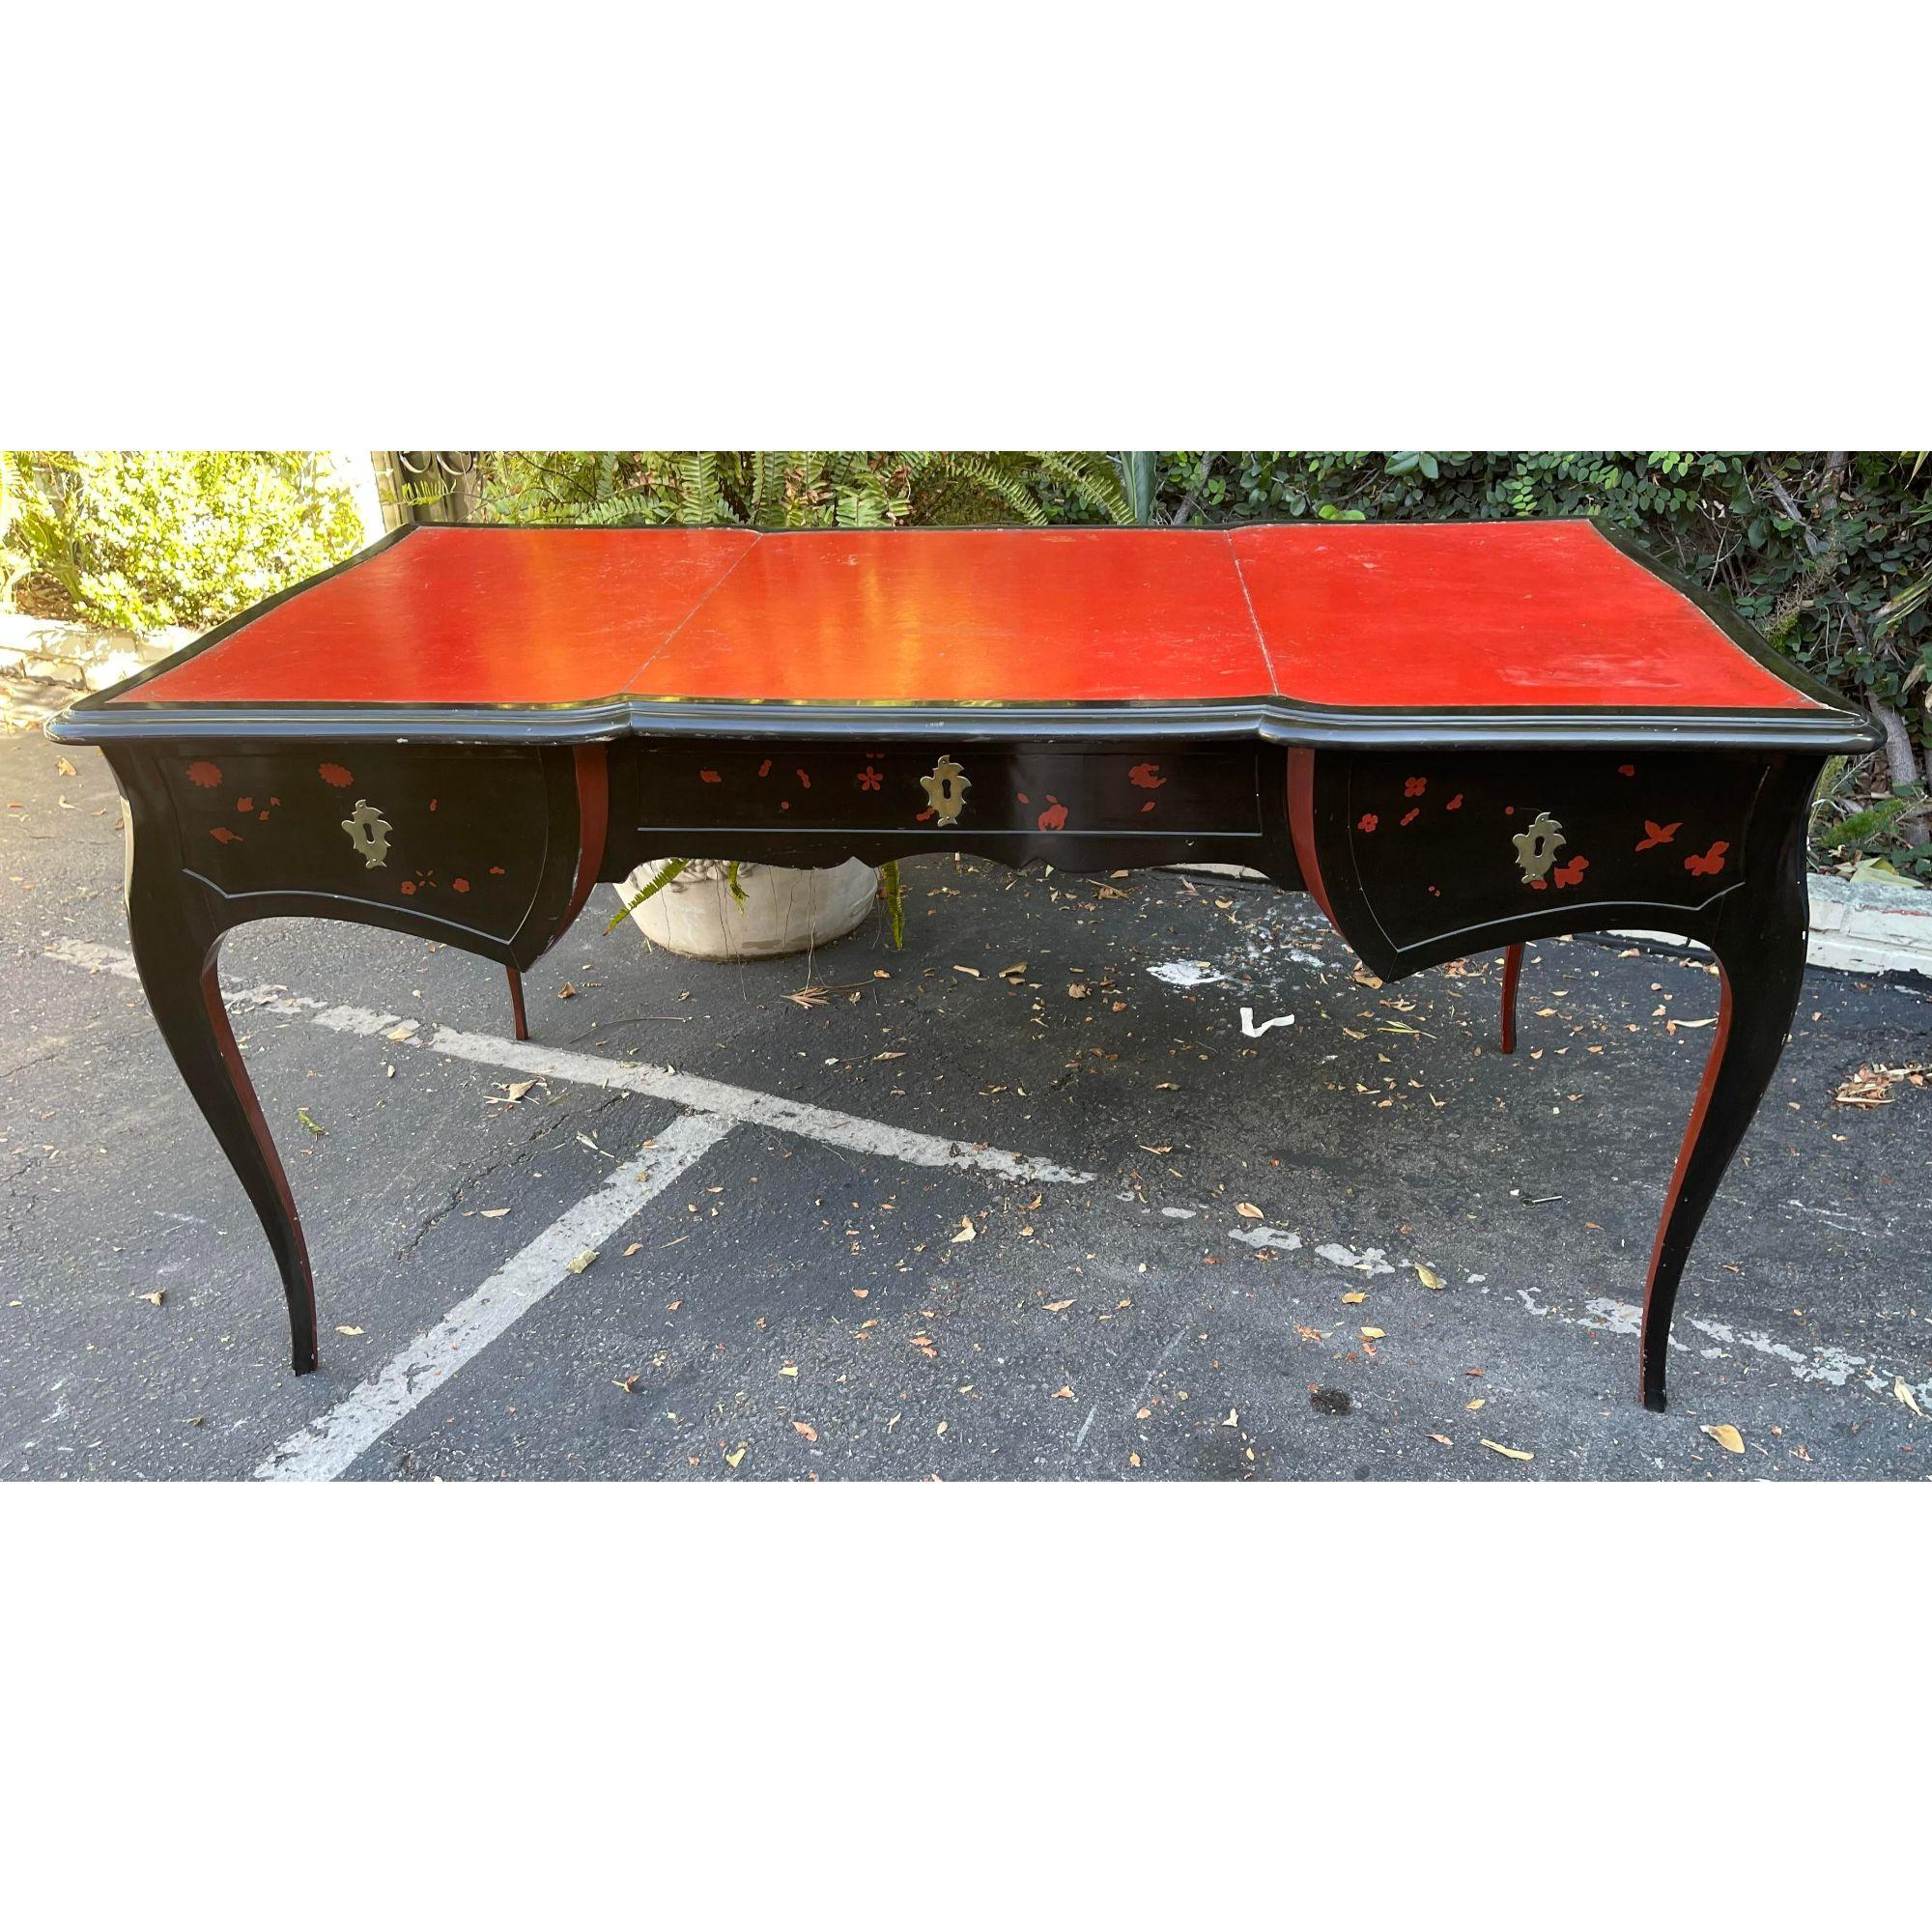 Antique Chinoiserie Black Lacquer Red Leather Bureau Plat Writing Table Desk For Sale 2